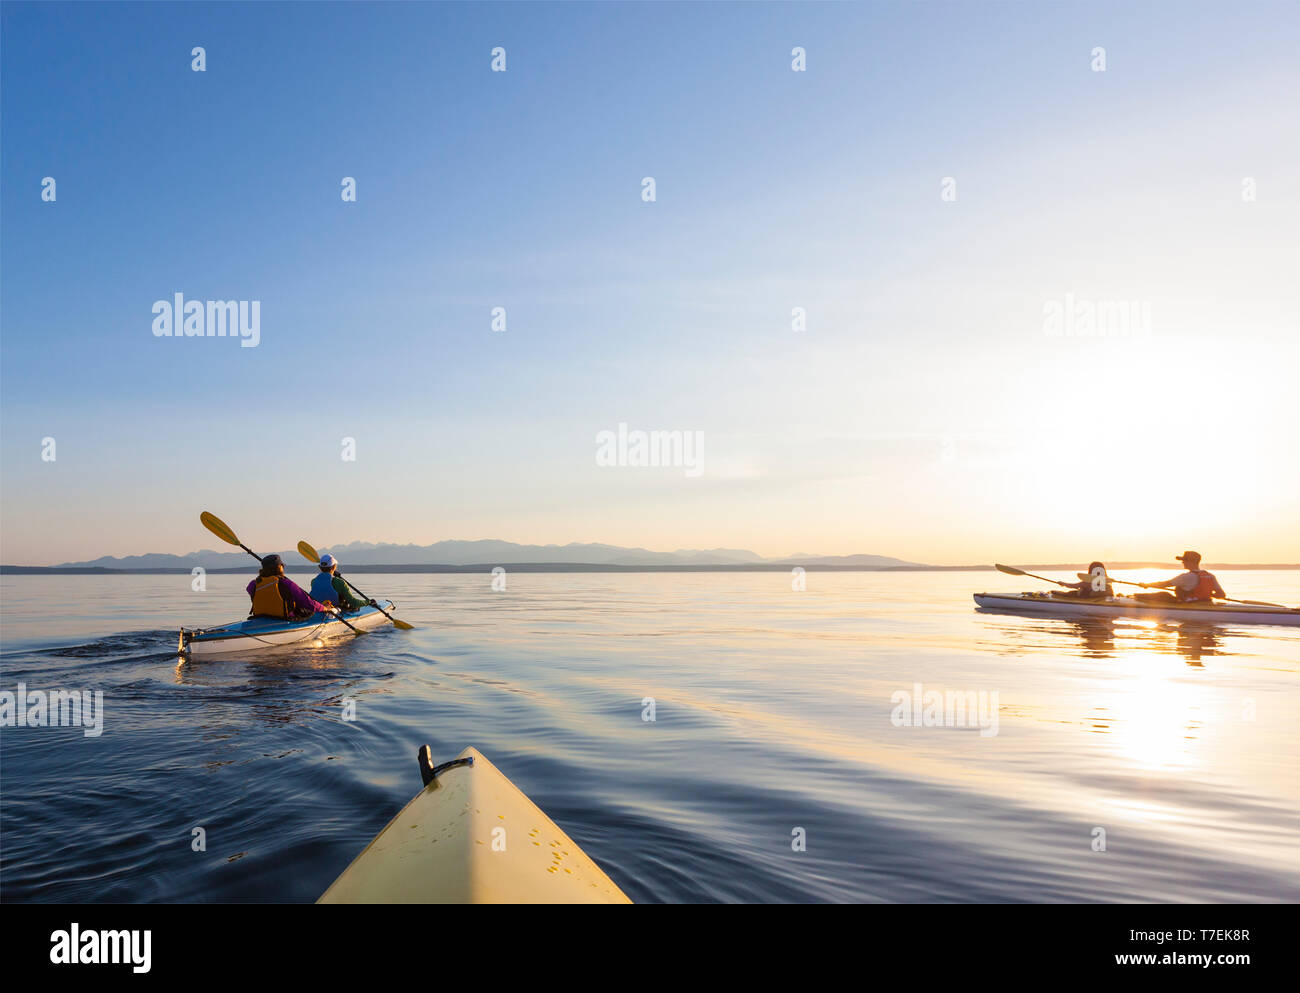 Group of people friends sea kayaking off Whidbey Island in Puget Sound, Washington State. Active outdoor adventure water sports. Stock Photo